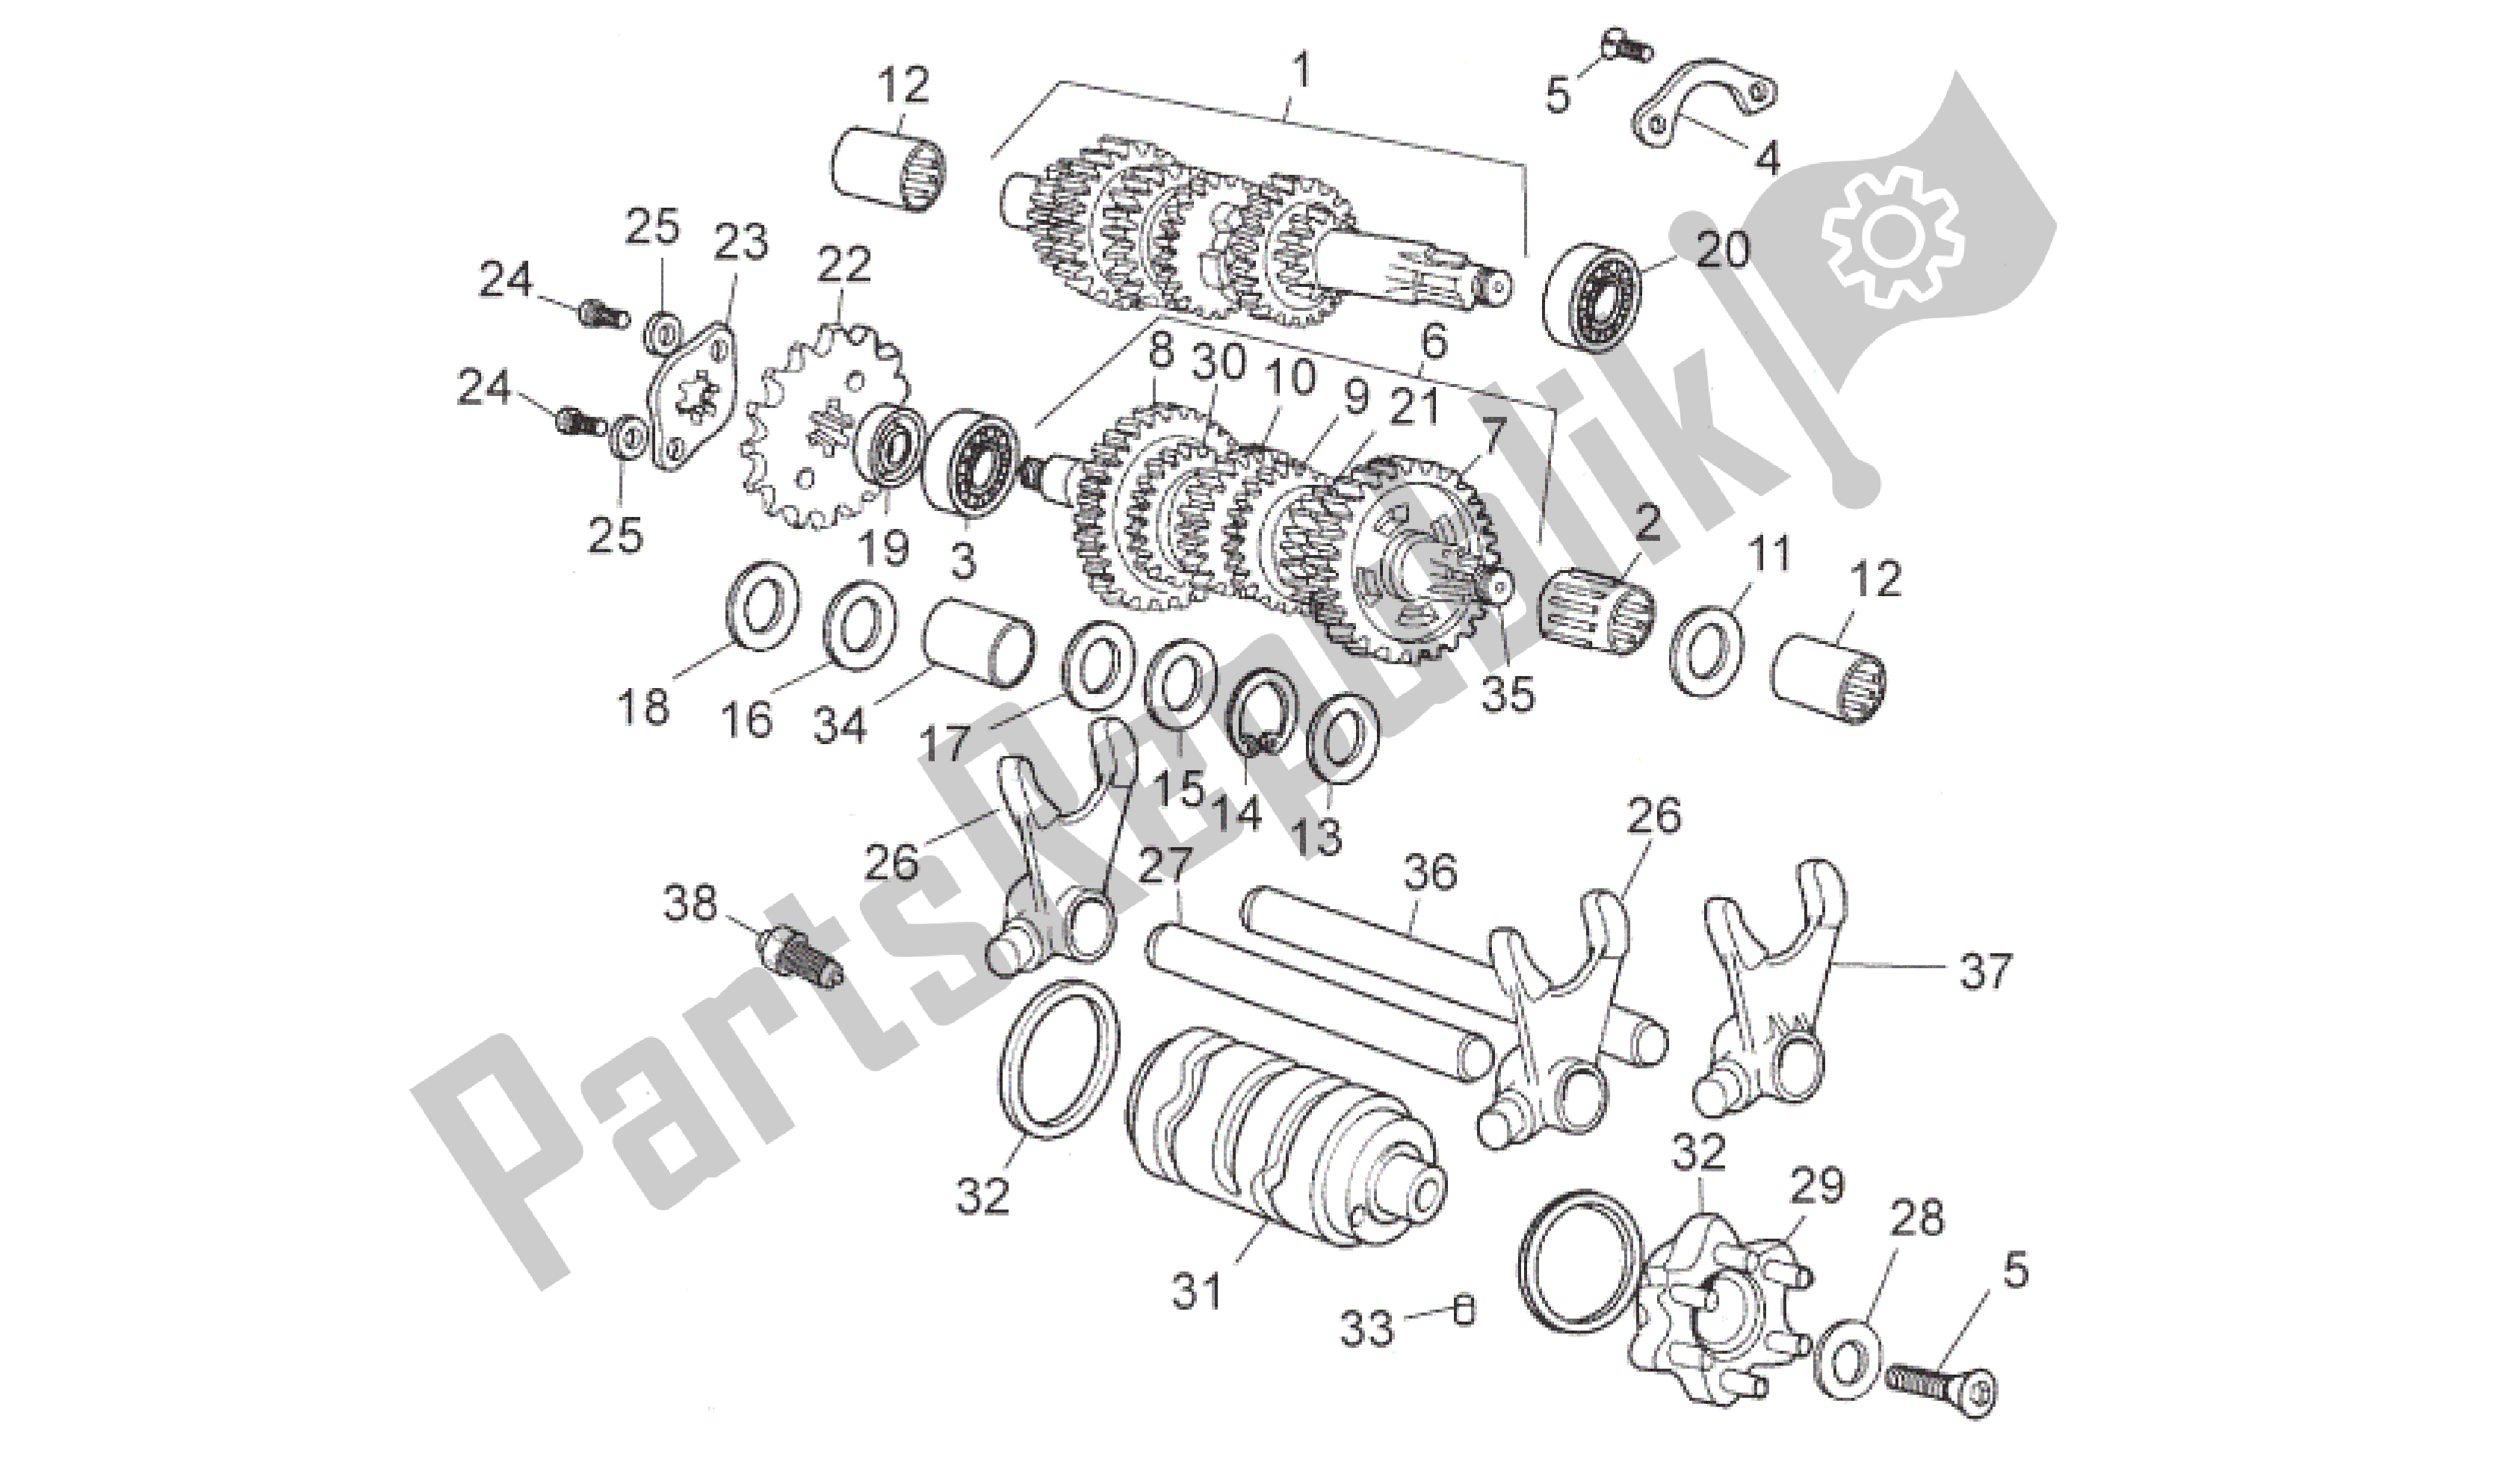 All parts for the Gear Box of the Aprilia RS 50 2006 - 2010